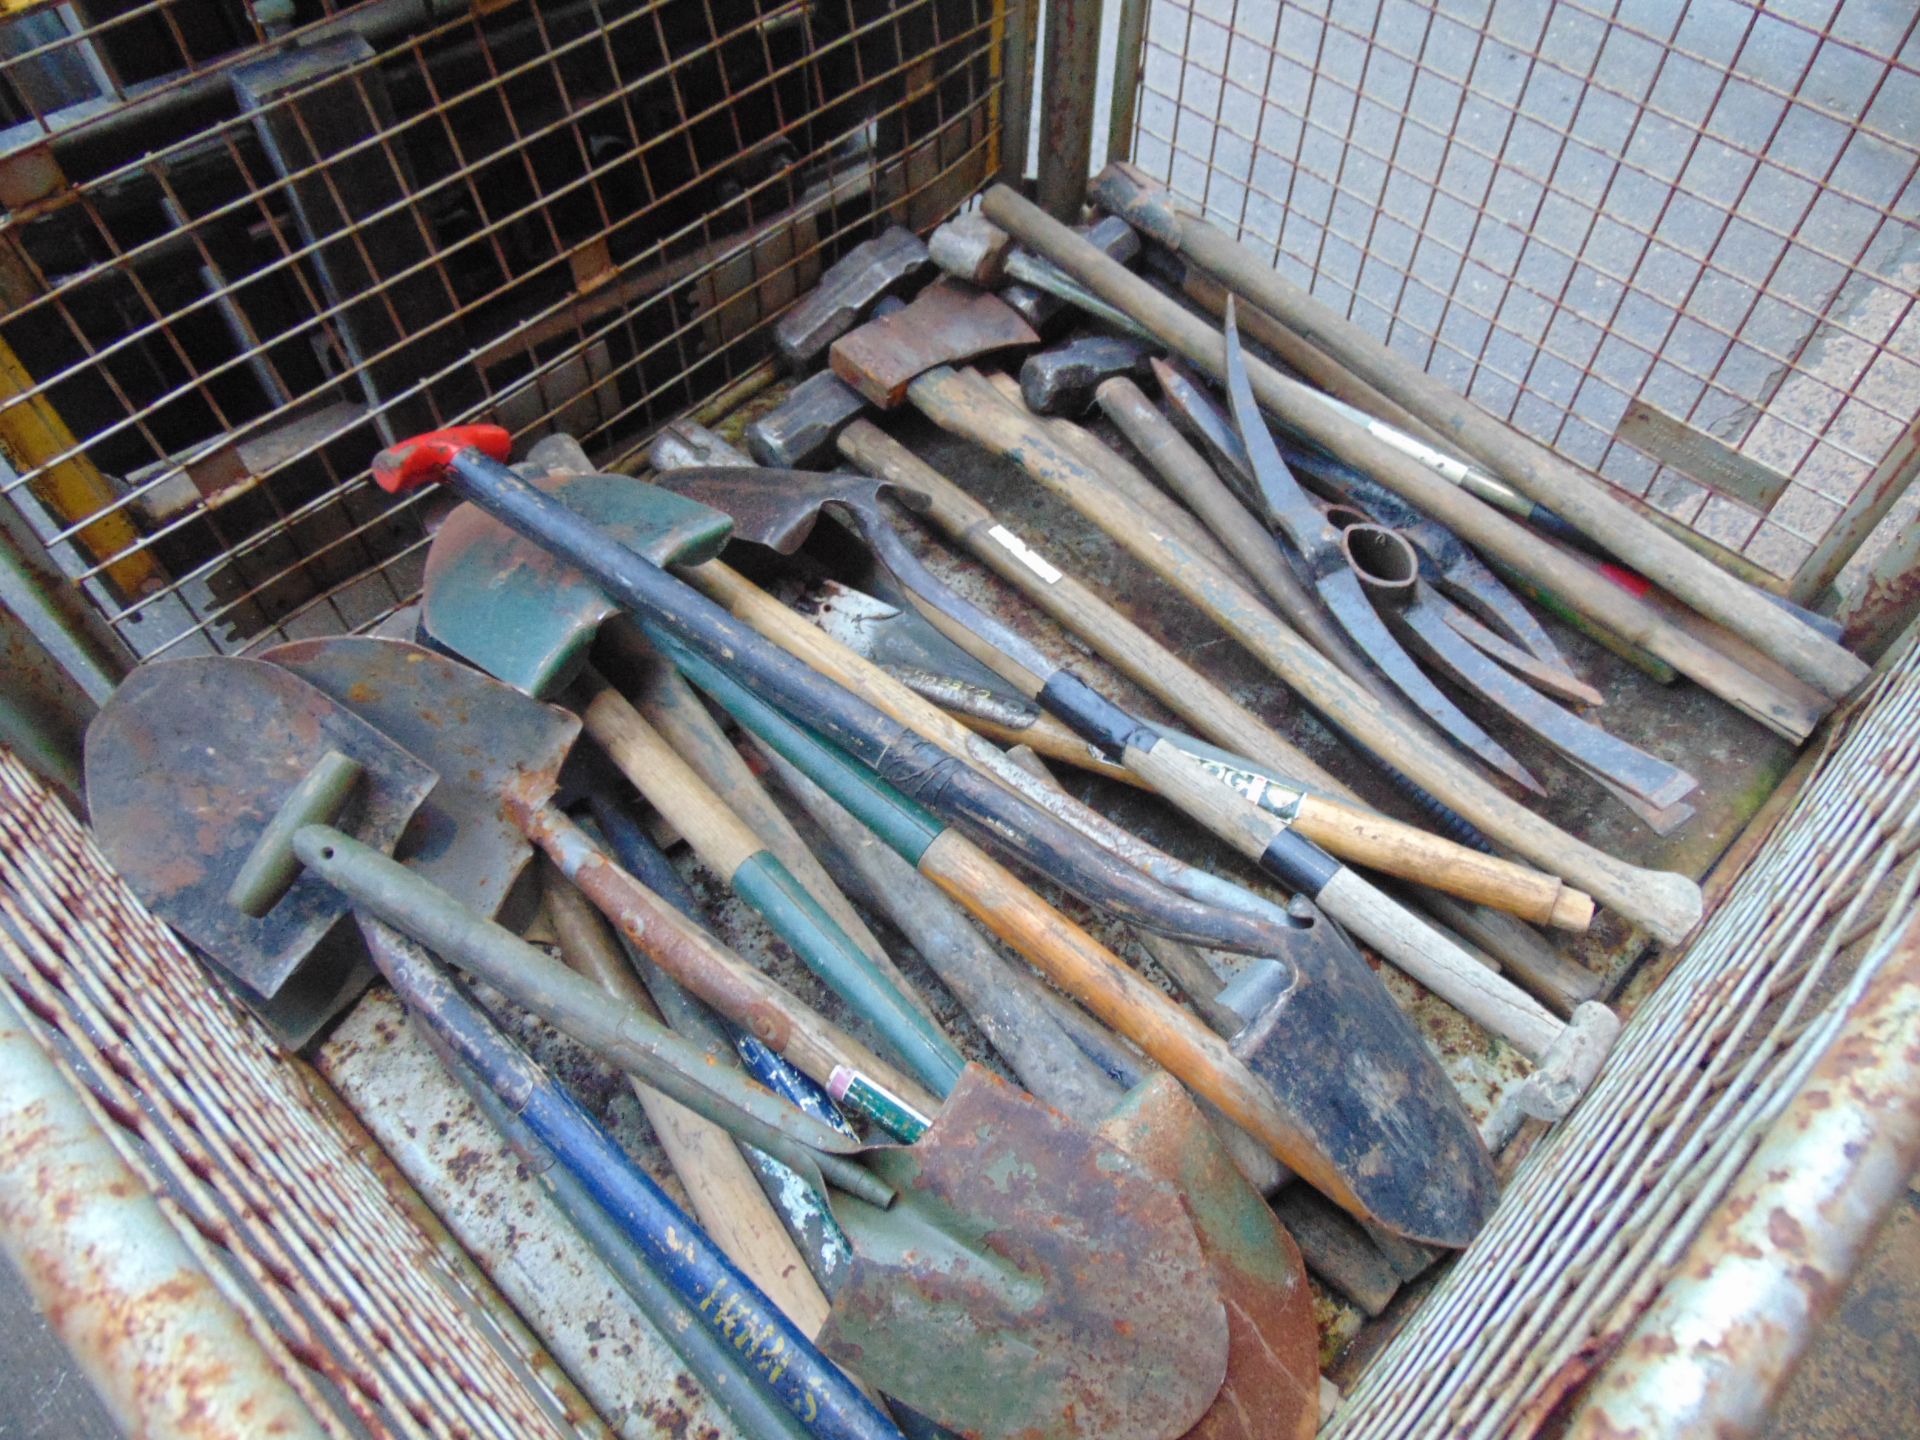 1 x Stillage 30+ British Army Pioneer Picks, Shovels, Axes and Sledge Hammers - Image 2 of 5